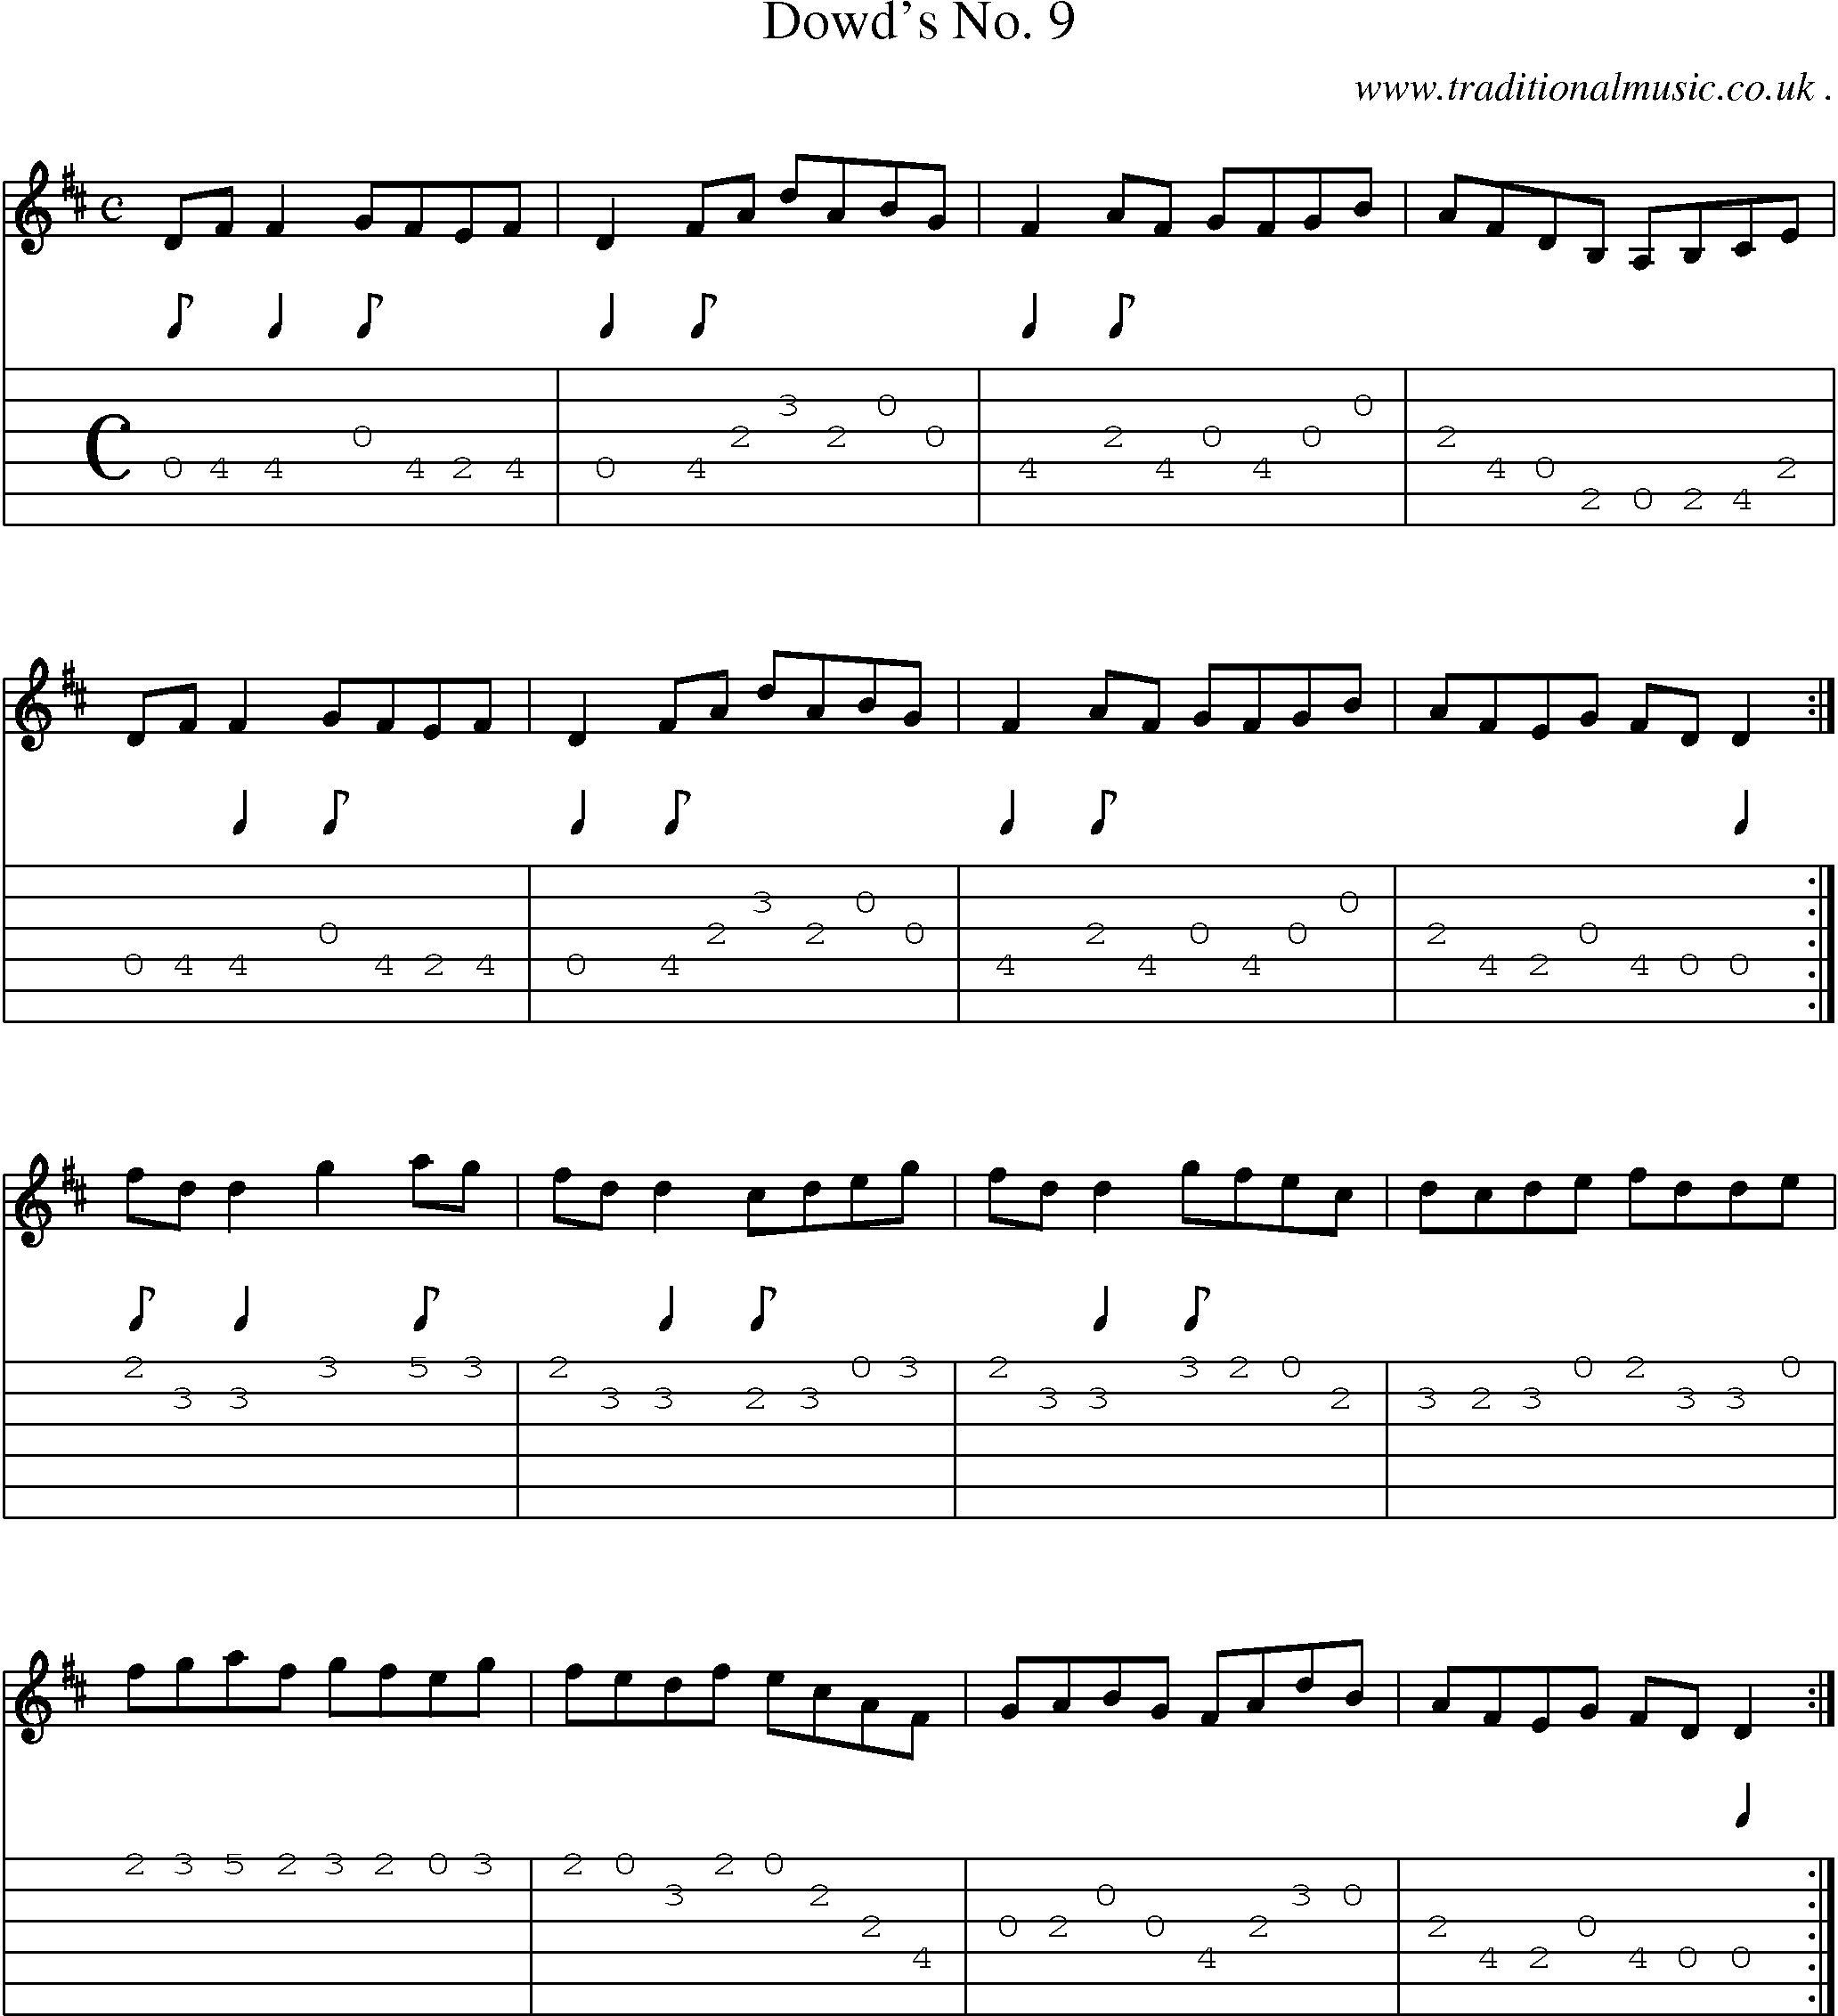 Sheet-Music and Guitar Tabs for Dowds No 9